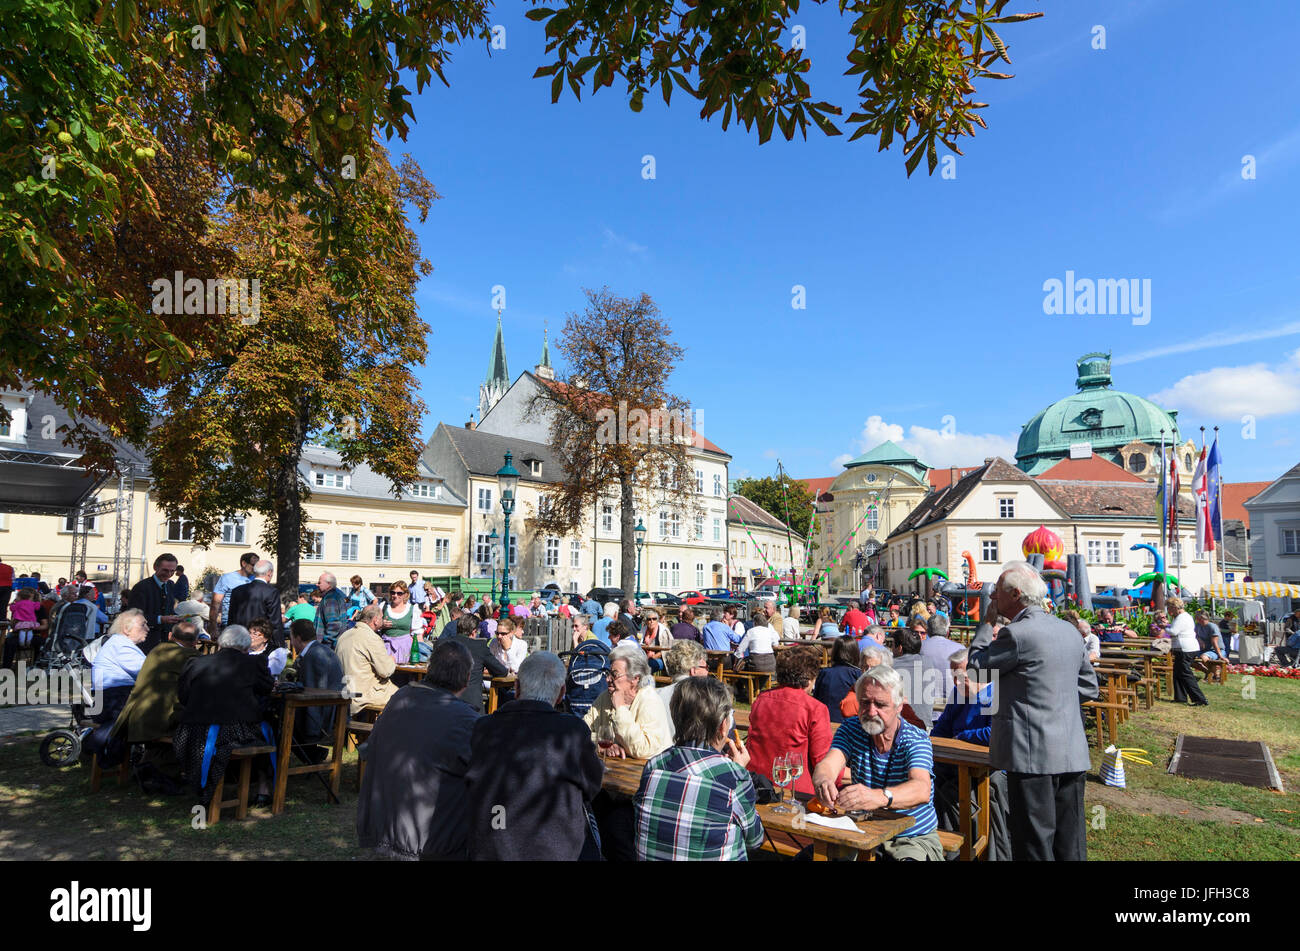 Storm and grape crown feast on the Town Hall square, in the background the seminary Klosterneuburg, Austria, Lower Austria, Viennese wood, Klosterneuburg Stock Photo